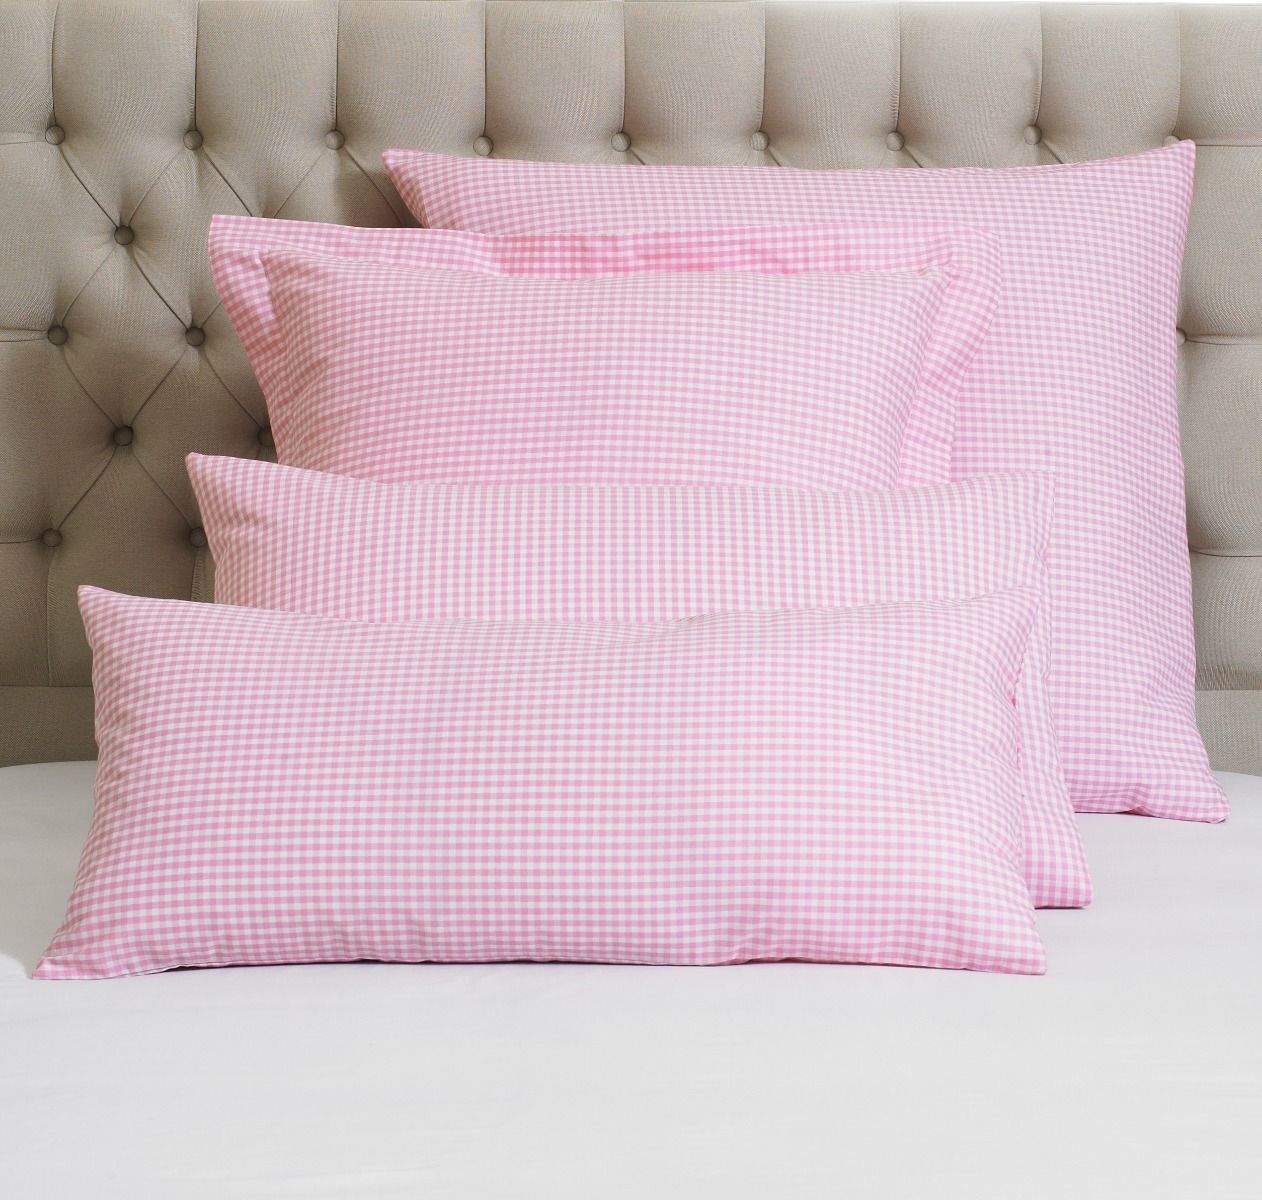 Luxury New 2x Gingham Modern Check Pillowcase Pair Bed and Bath Linen